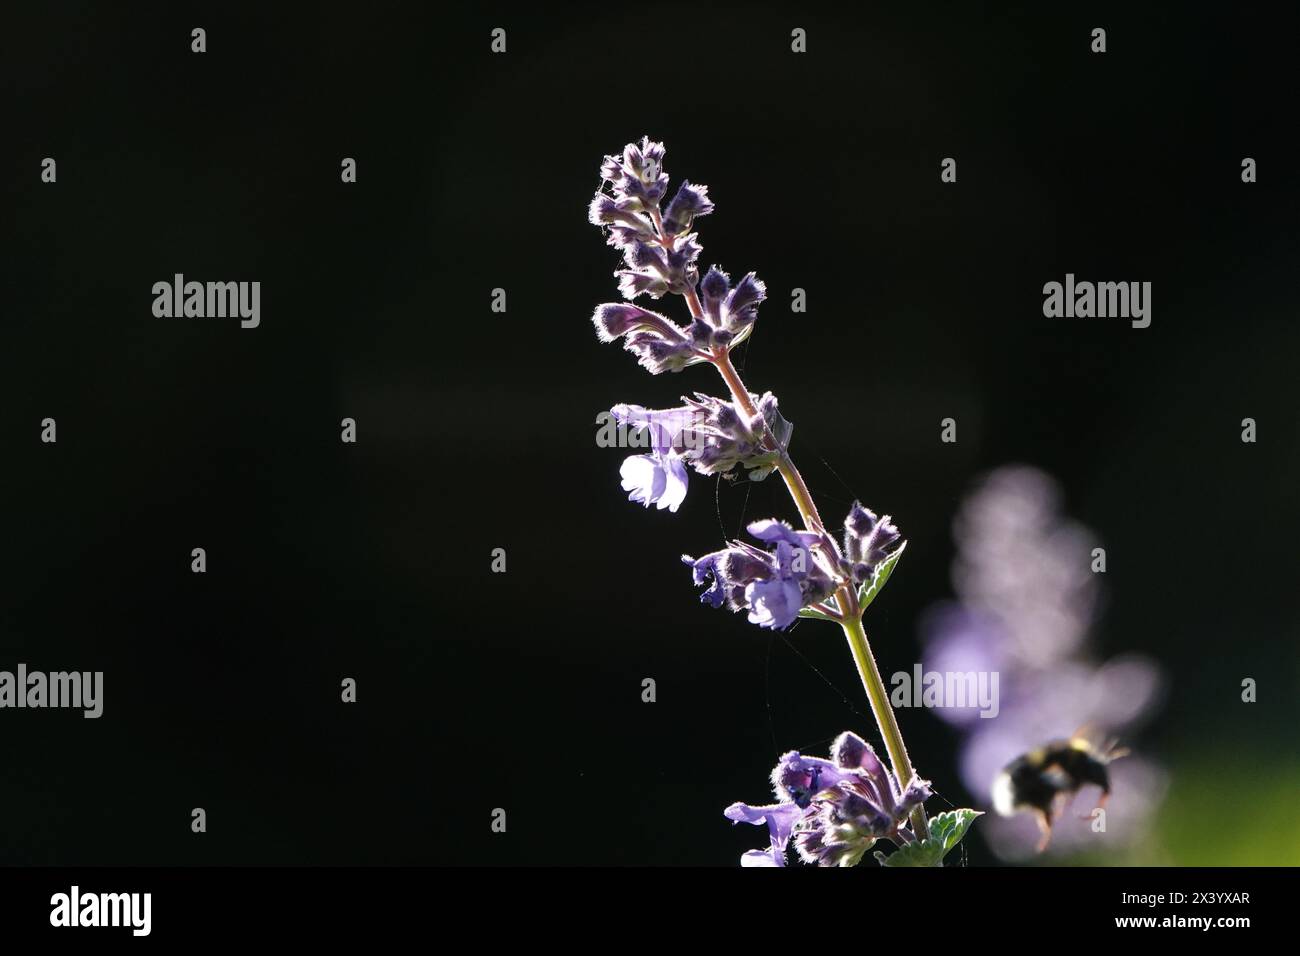 Back-Lit Salvia Flowers with Bumblebee Stock Photo